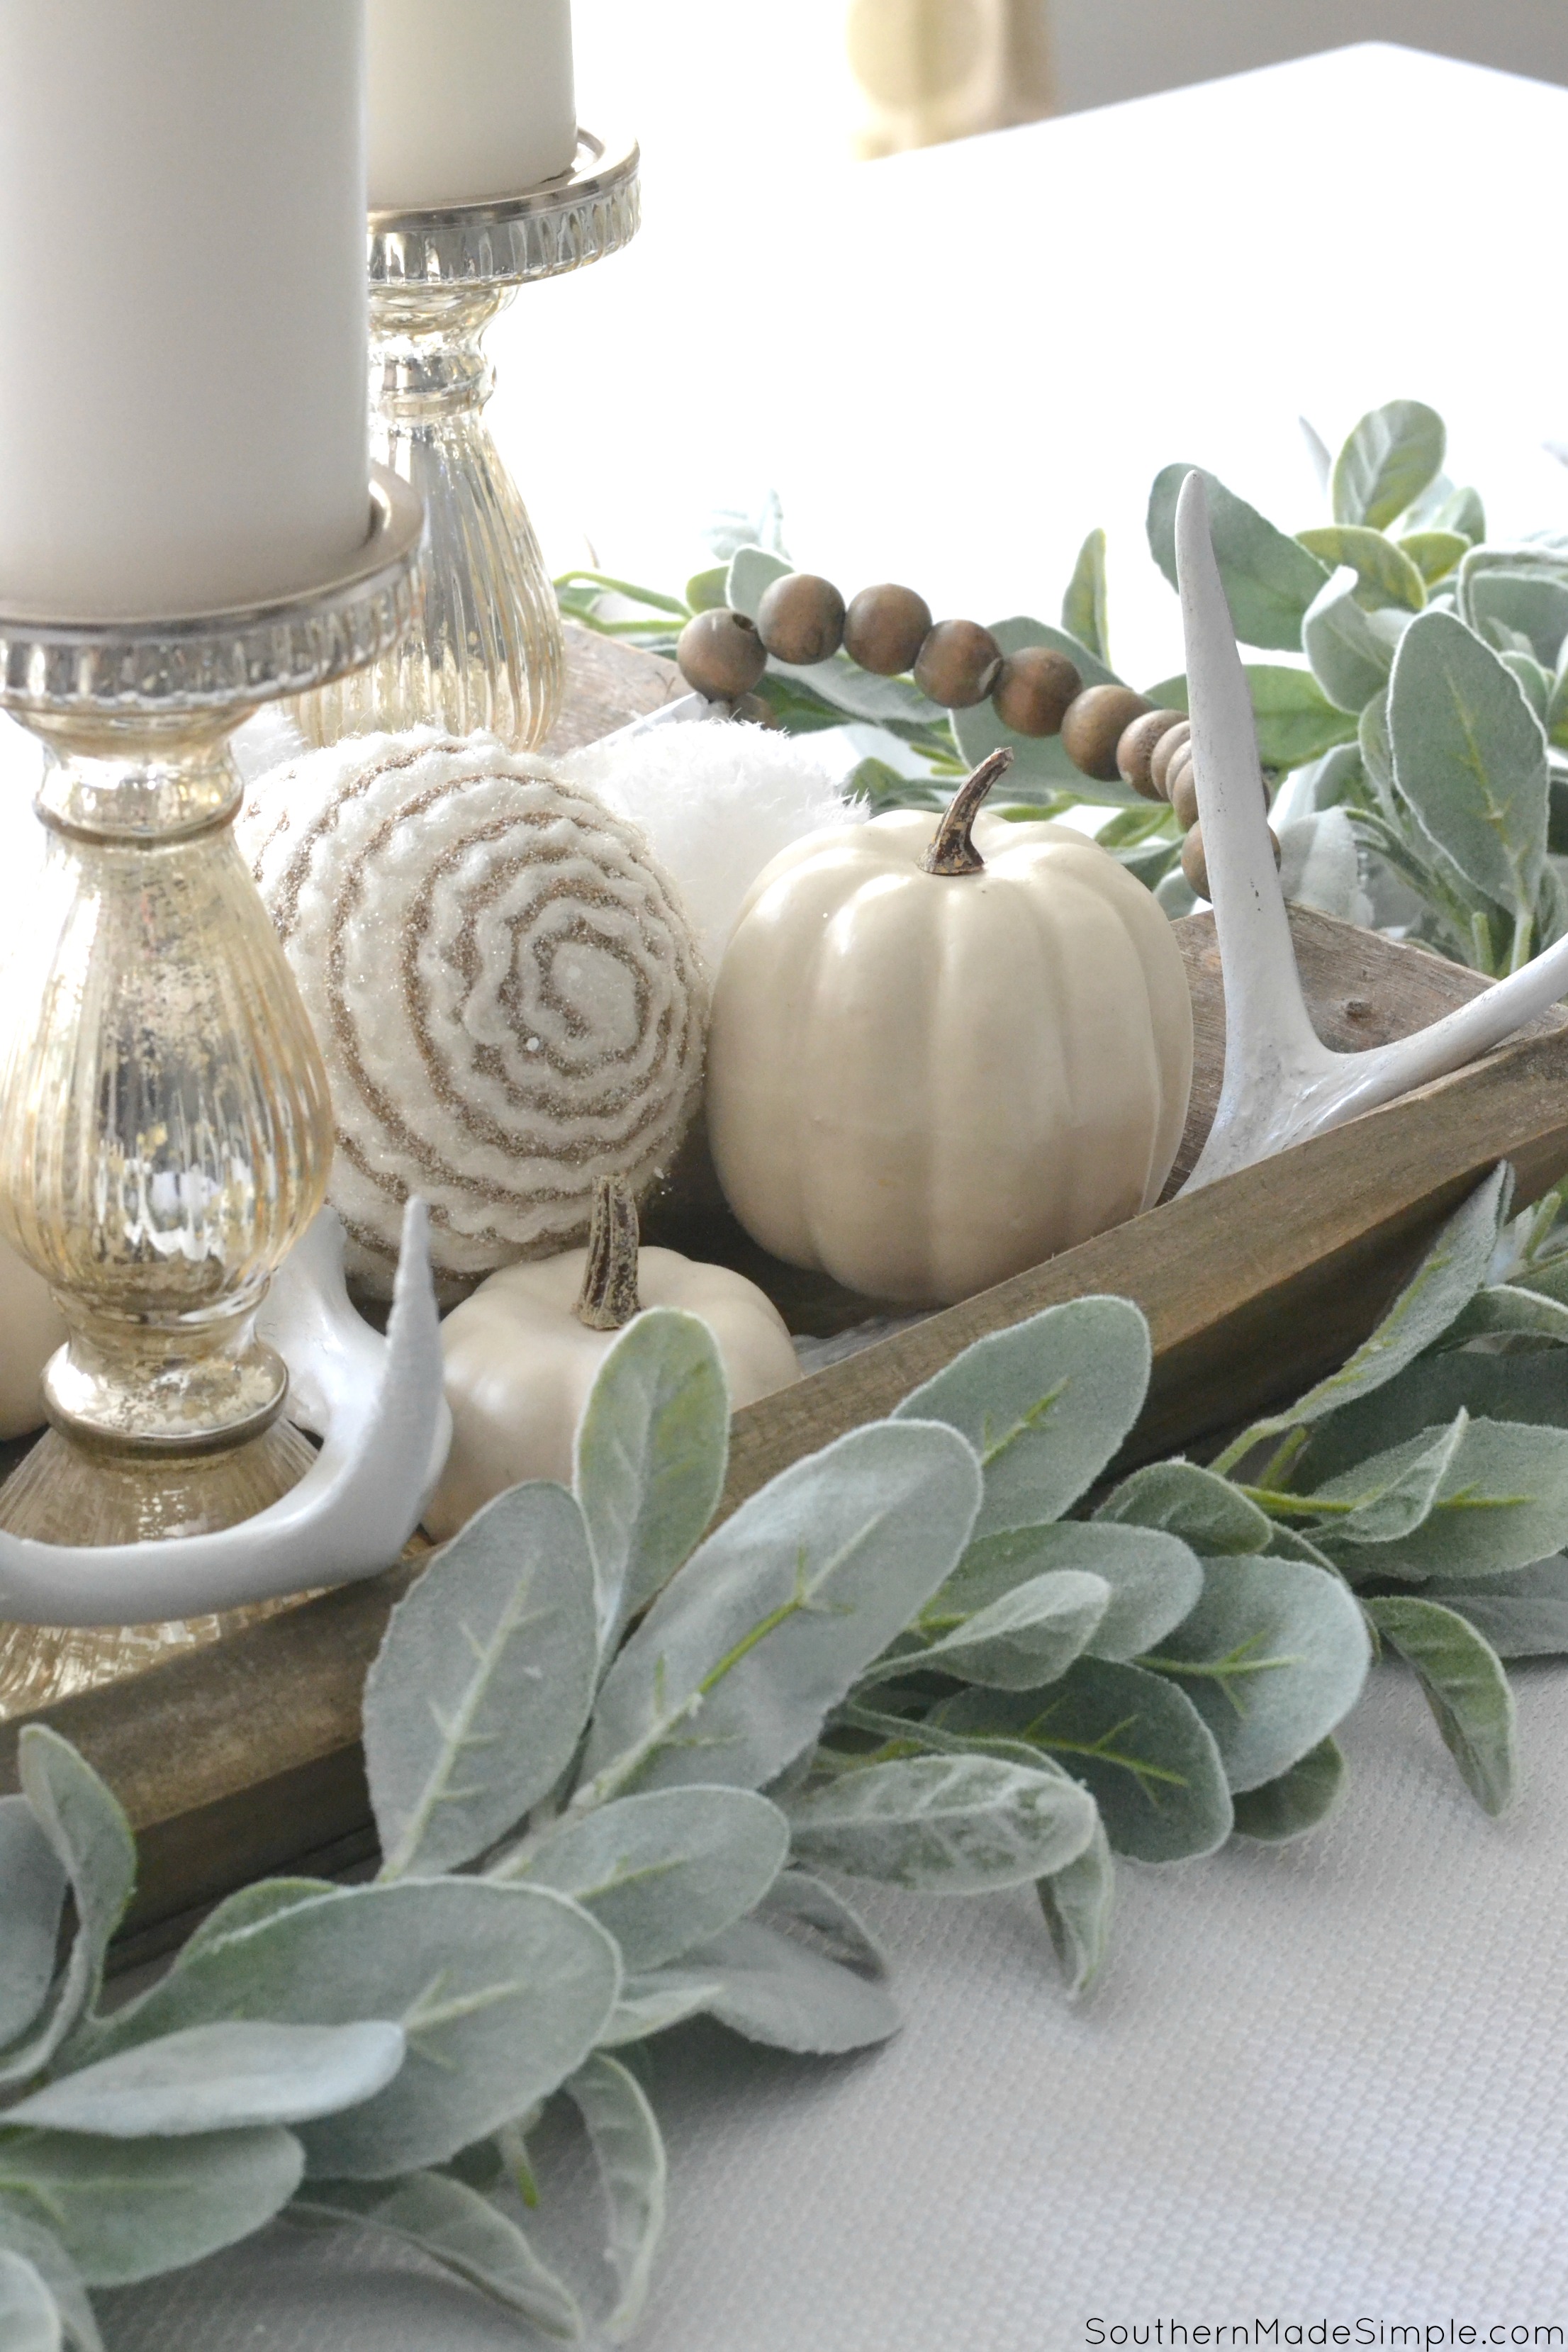 How to Create a Winter White Harvest Tablescape #CocaColaHolidaySpice